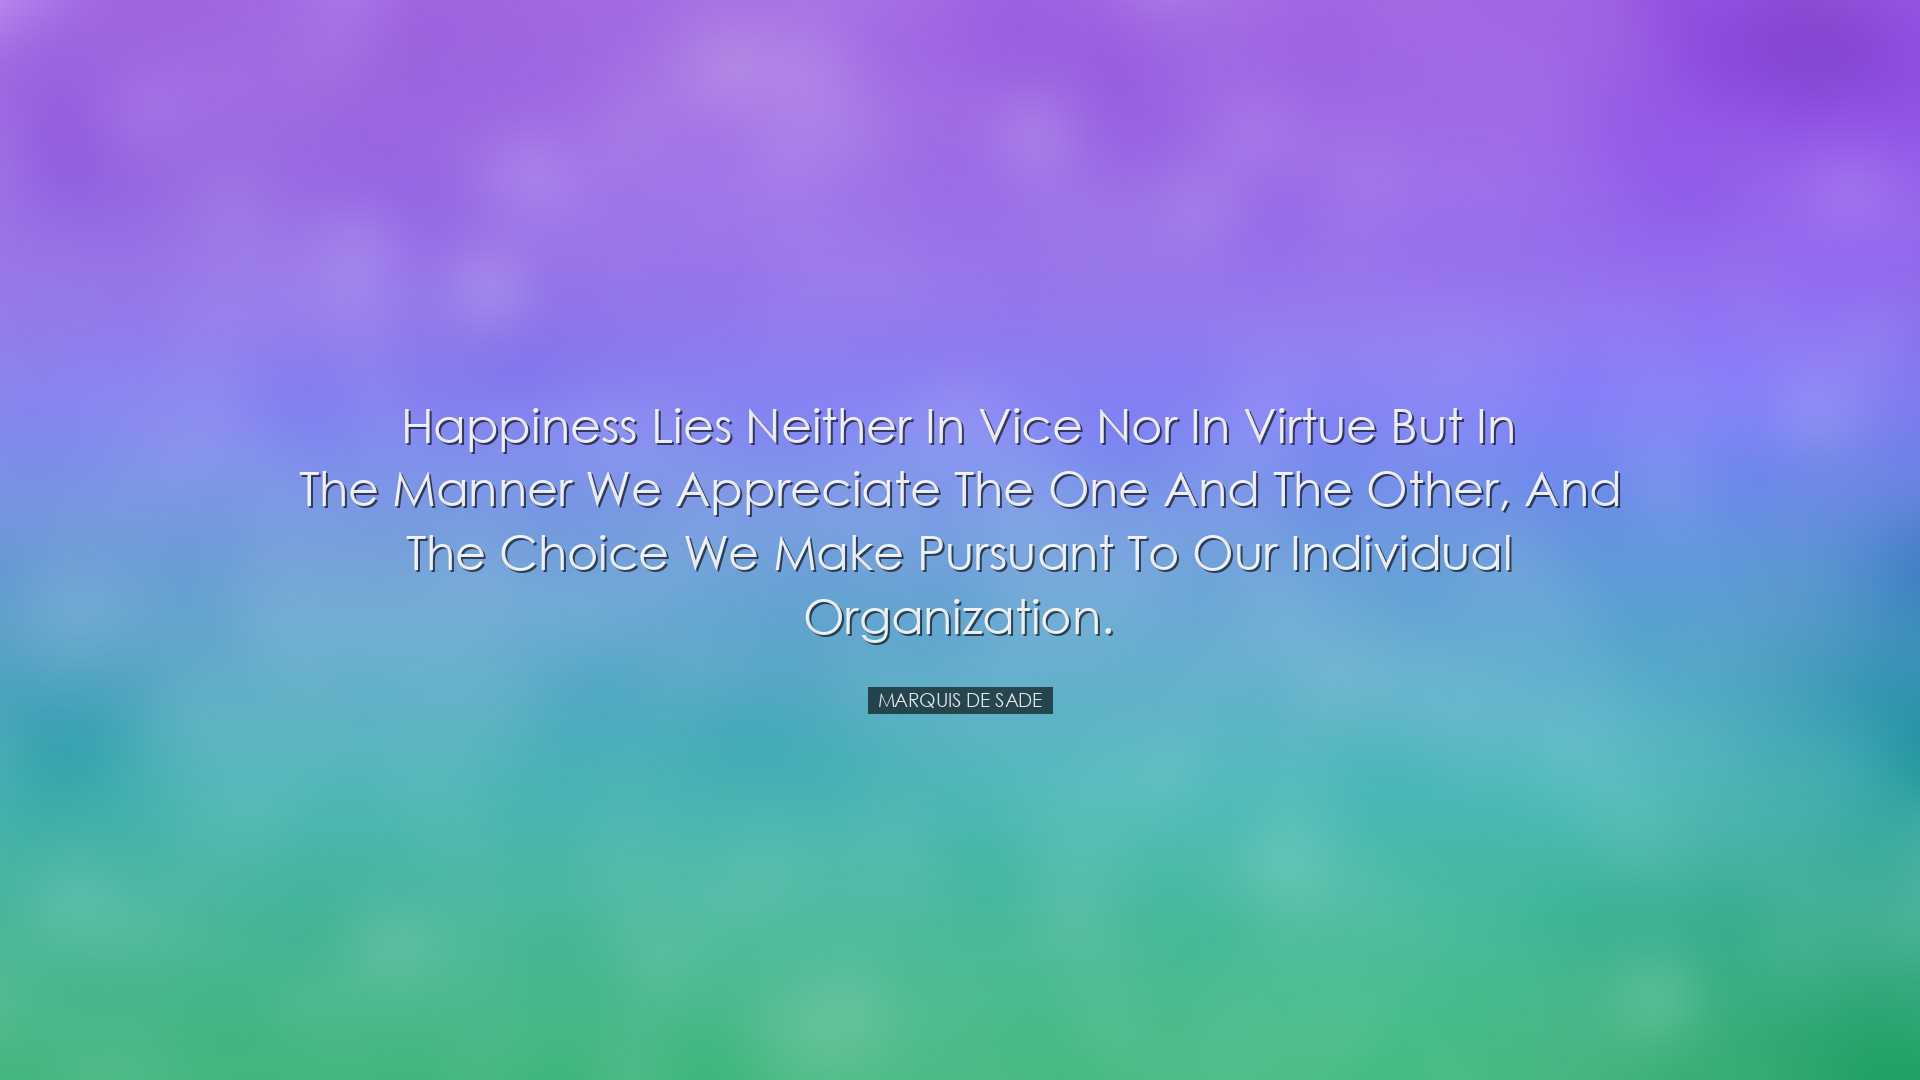 Happiness lies neither in vice nor in virtue but in the manner we